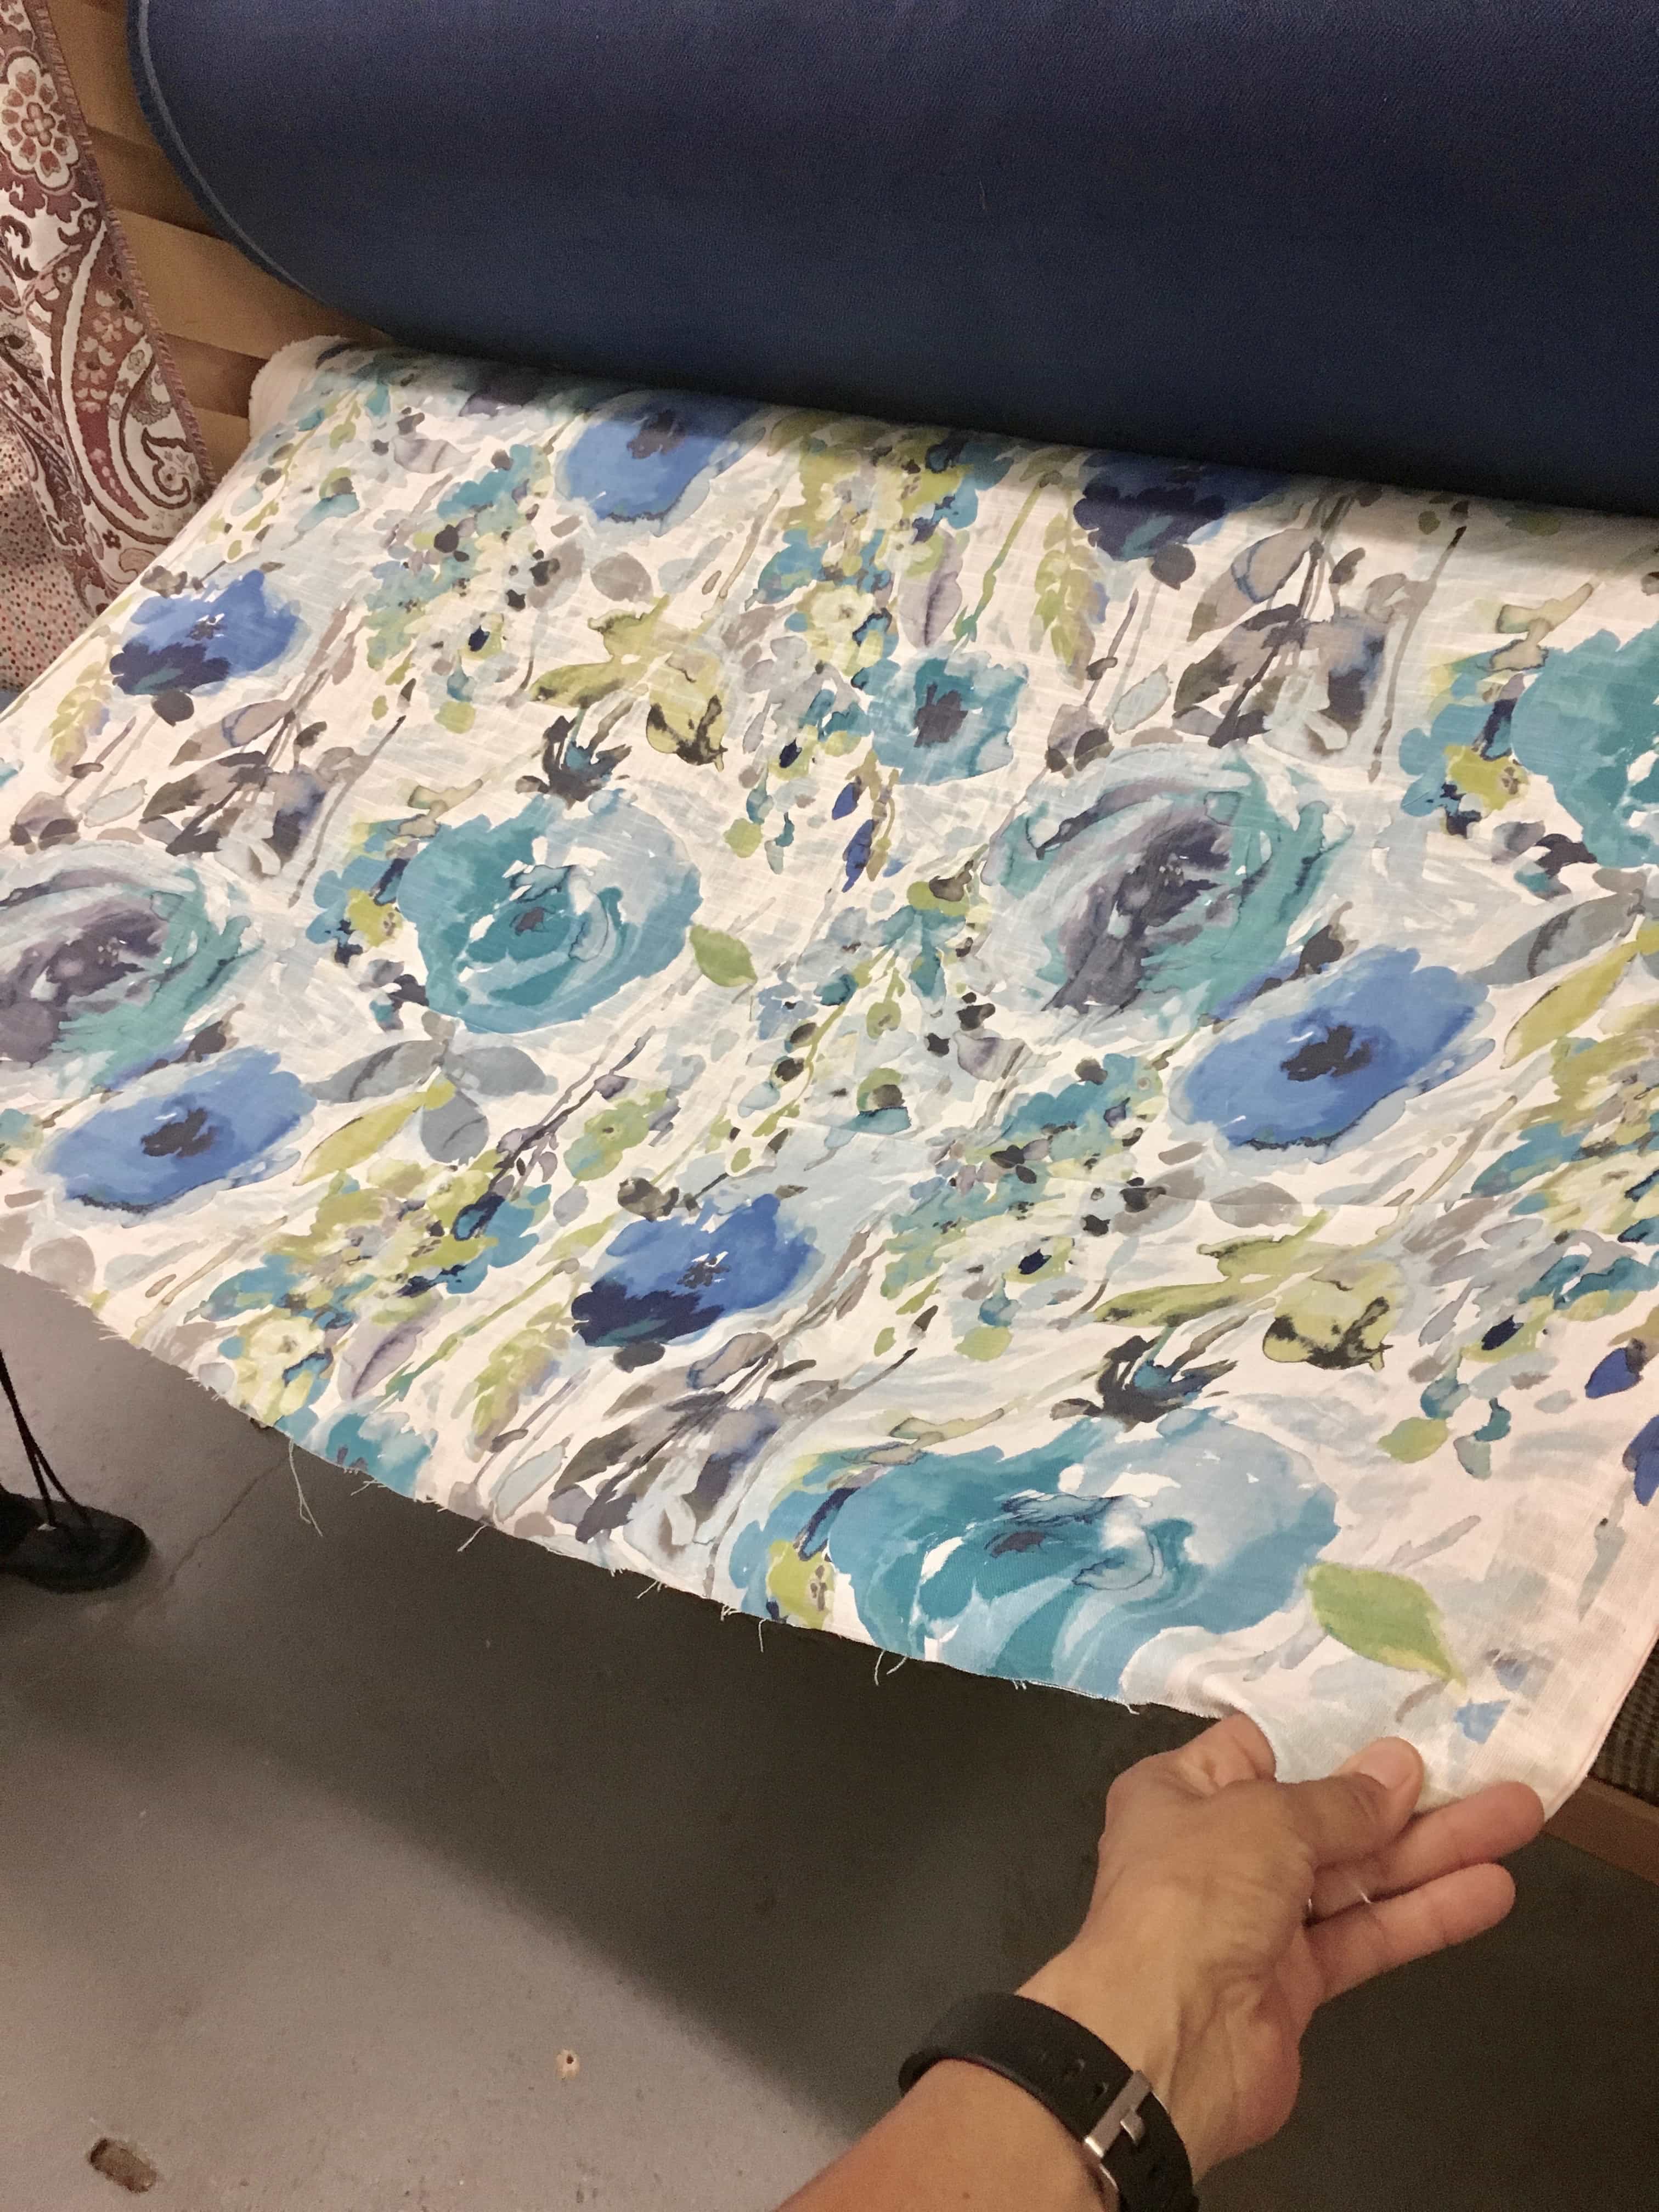 How to Frame Fabric: Find pretty fabric you love and staple it to plywood and insert into a picture frame for inexpensive wall art! | Thrift Diving - Over 500 DIY posts and projects!